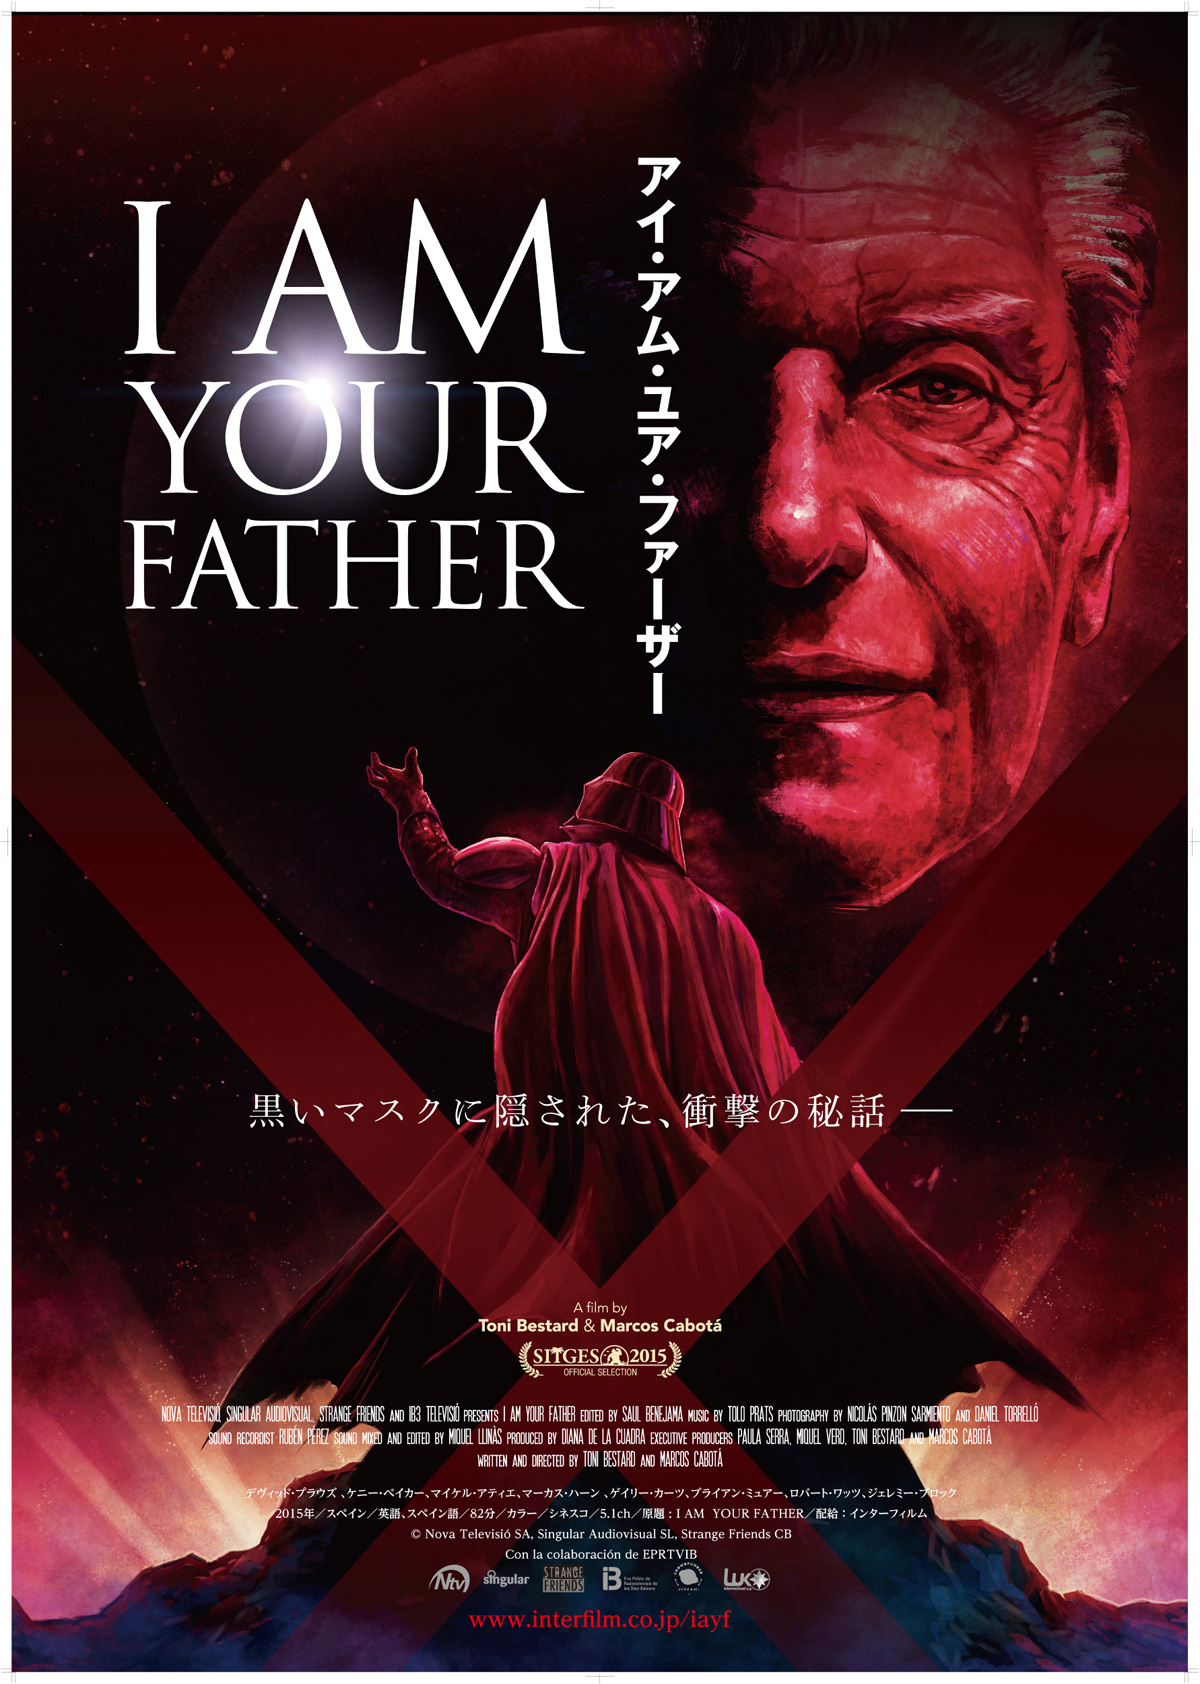 I AM YOUR FATHER/アイ・アム・ユア・ファーザーの画像